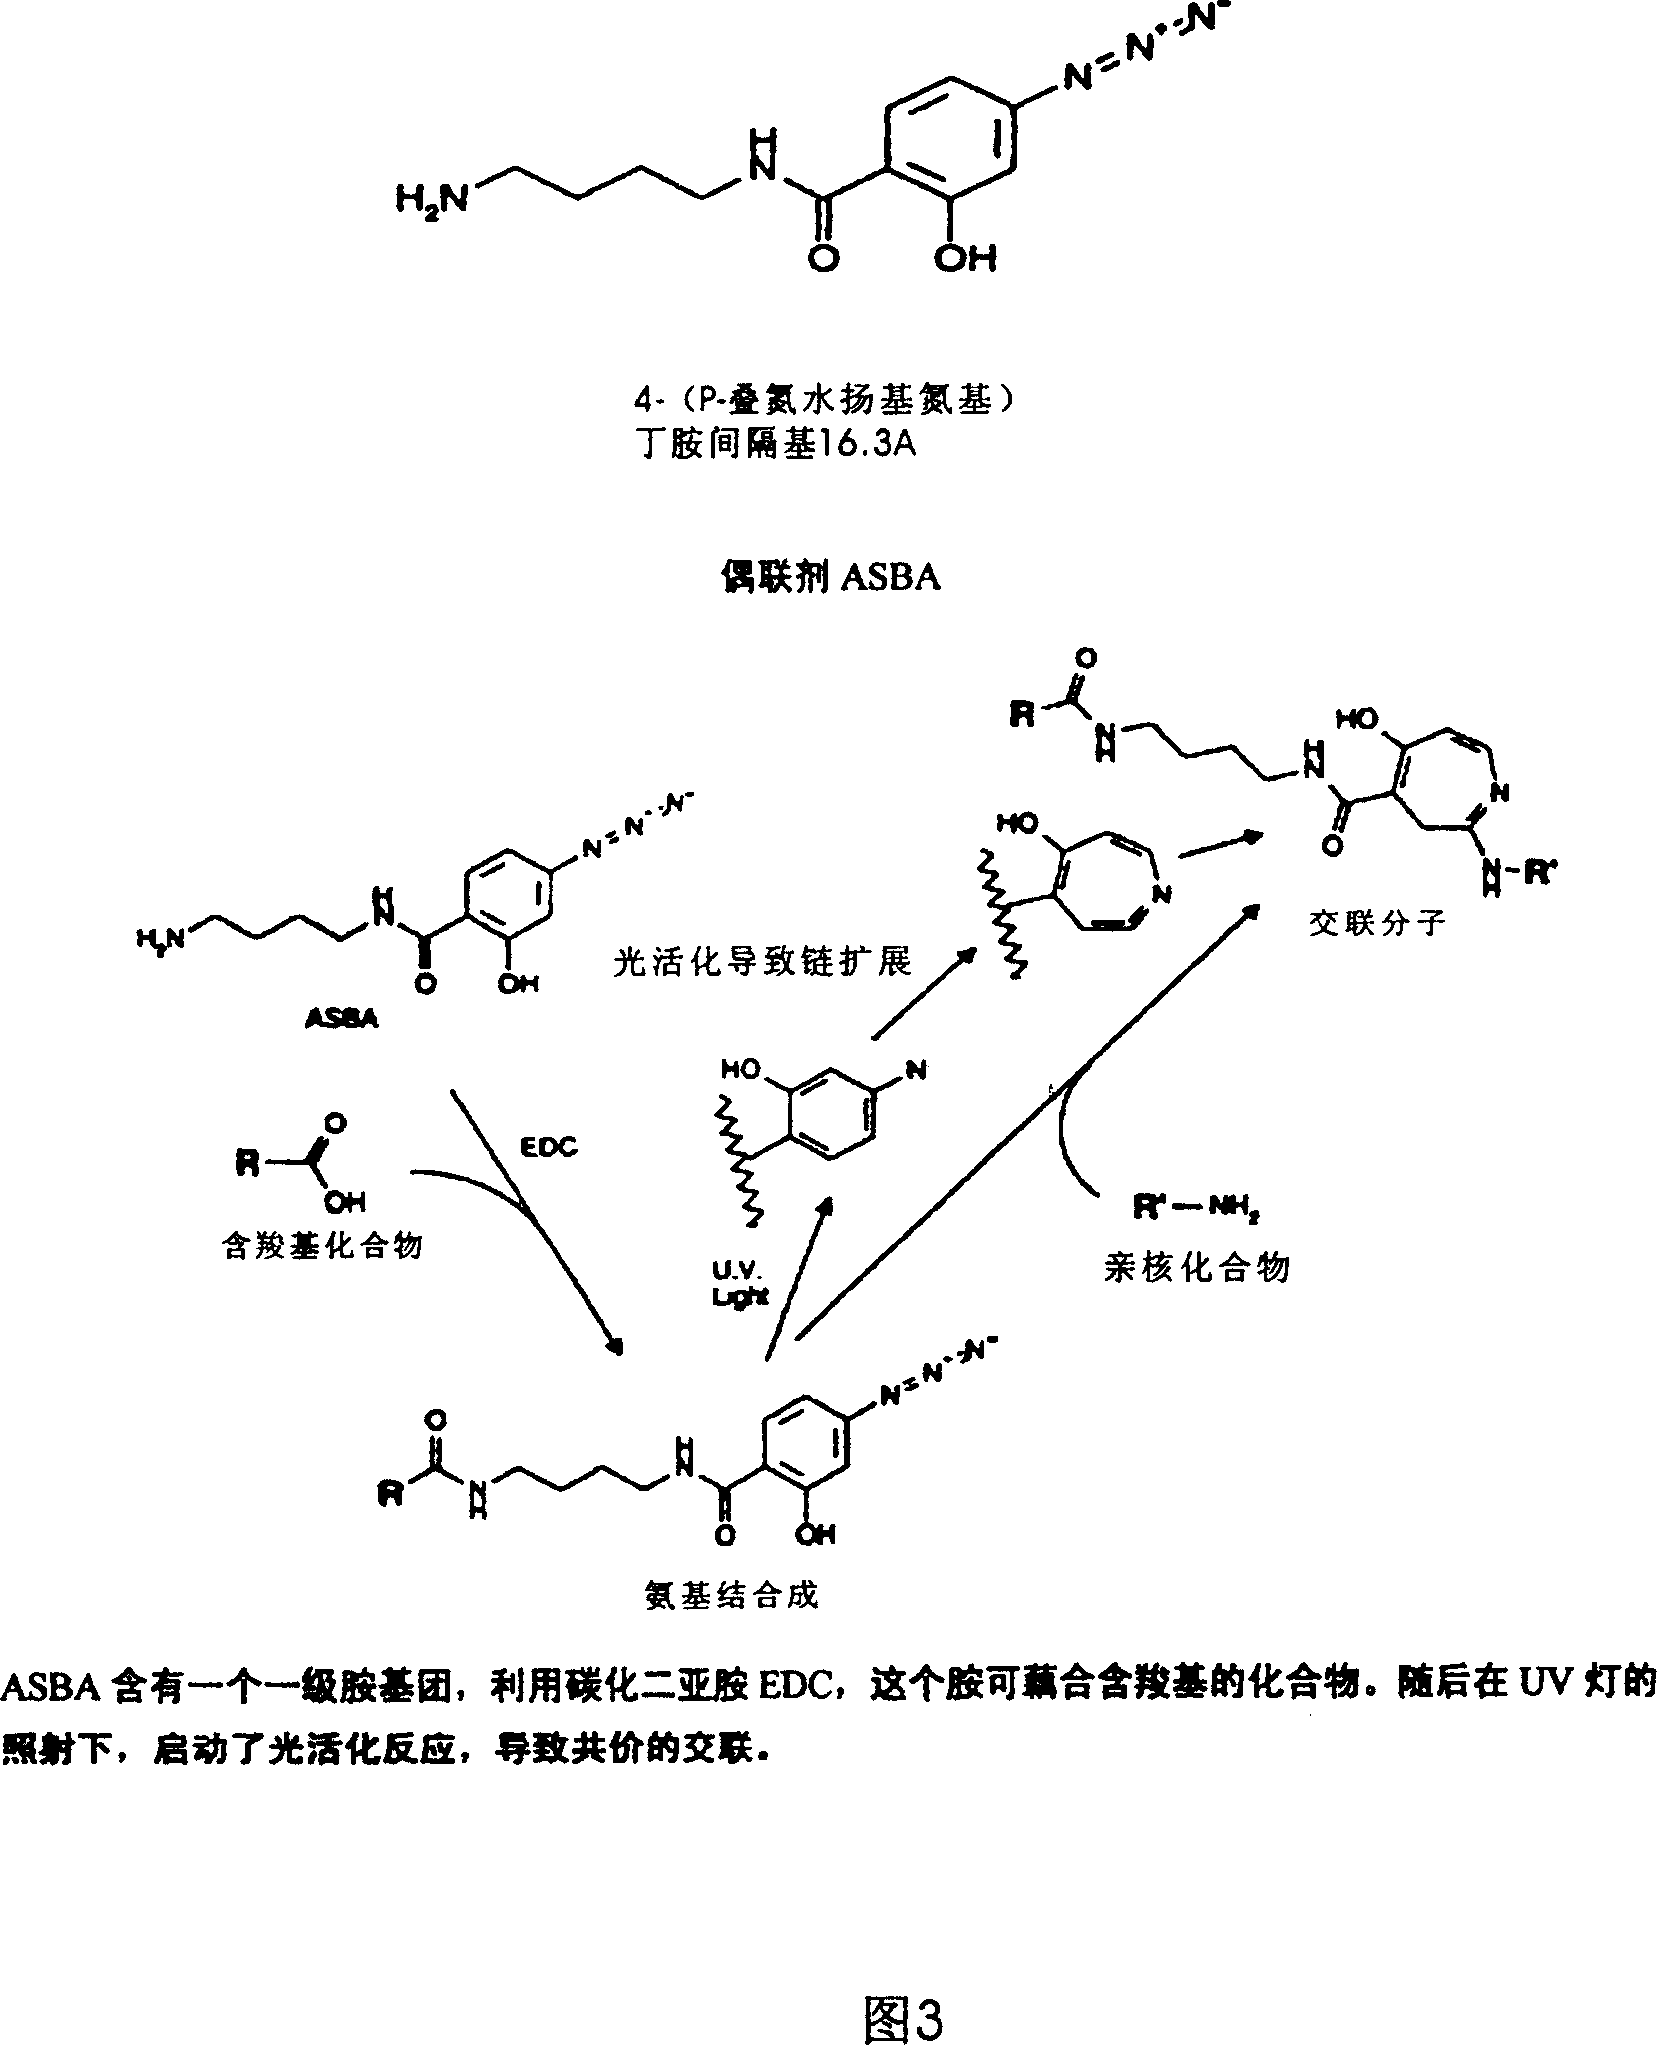 Technique for producing novel bio-agricultural chemical songgang-mycin